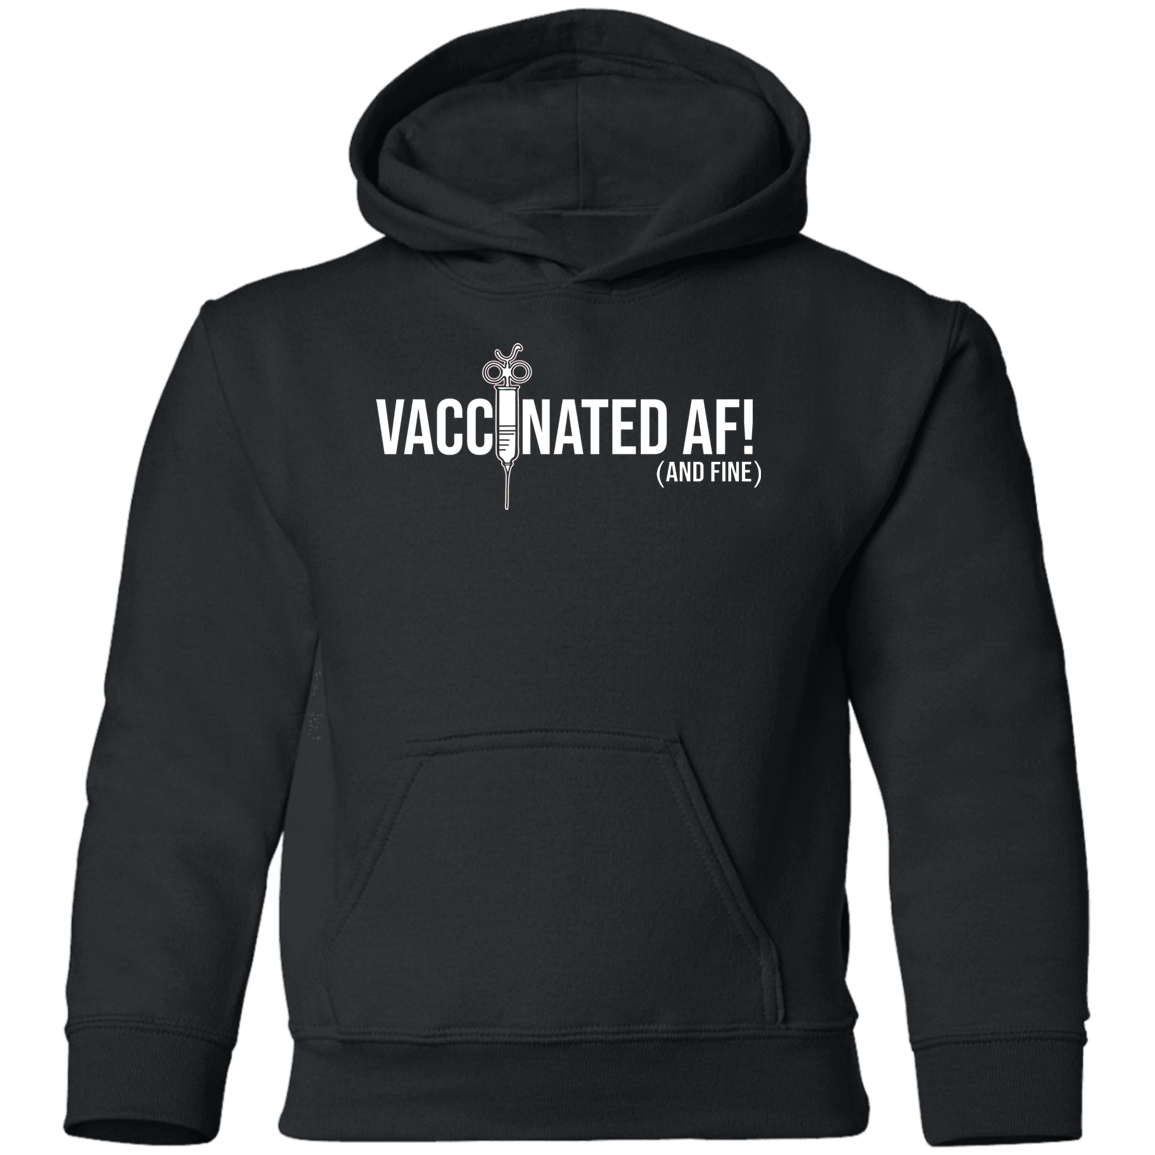 ArtichokeUSA Custom Design. Vaccinated AF (and fine). Youth Pullover Hoodie